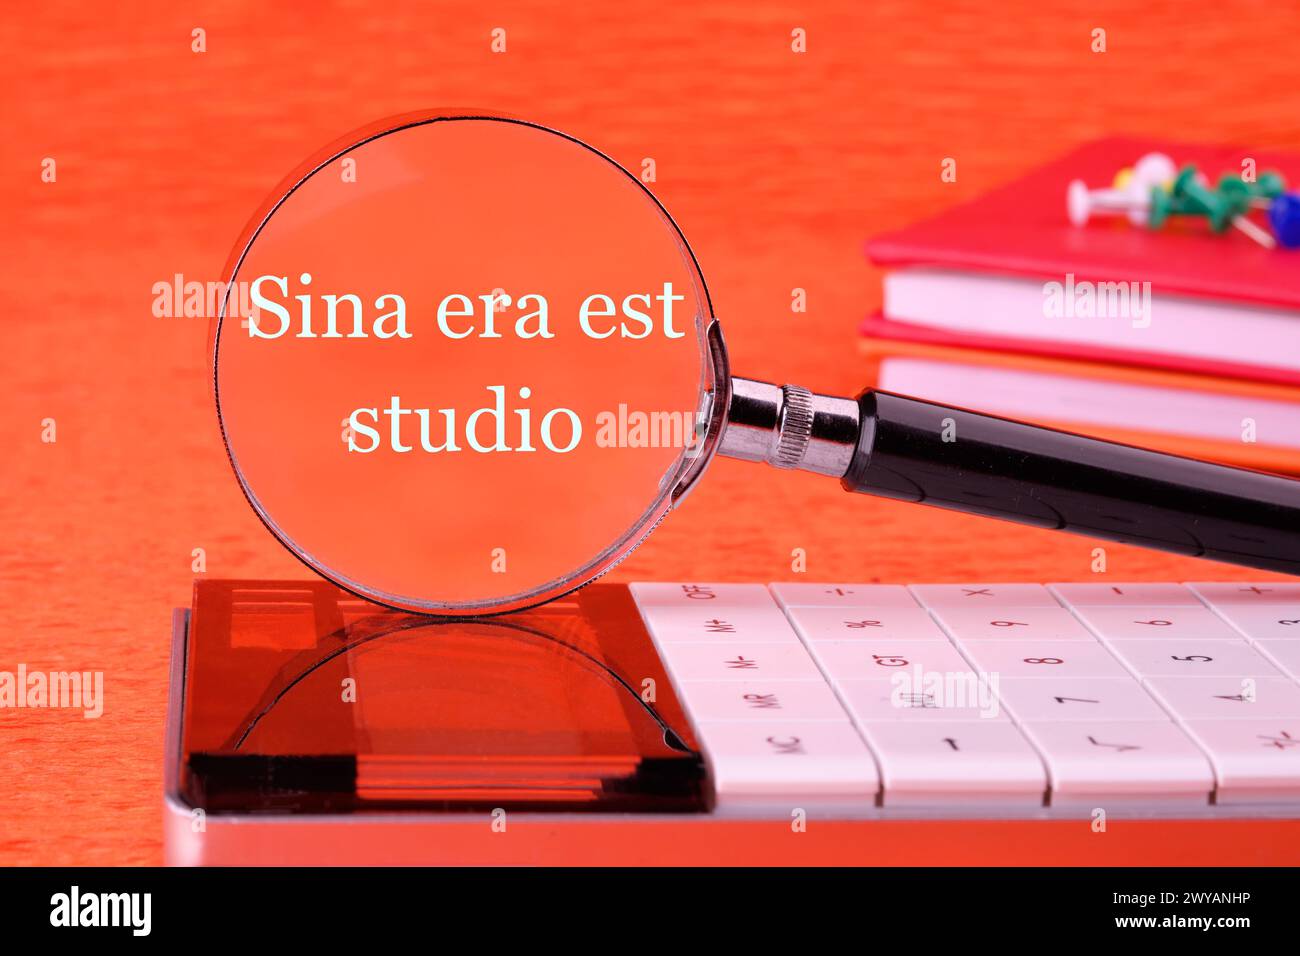 Sina era est studio It means Without anger and addiction through a magnifying glass in white font on an orange background Stock Photo